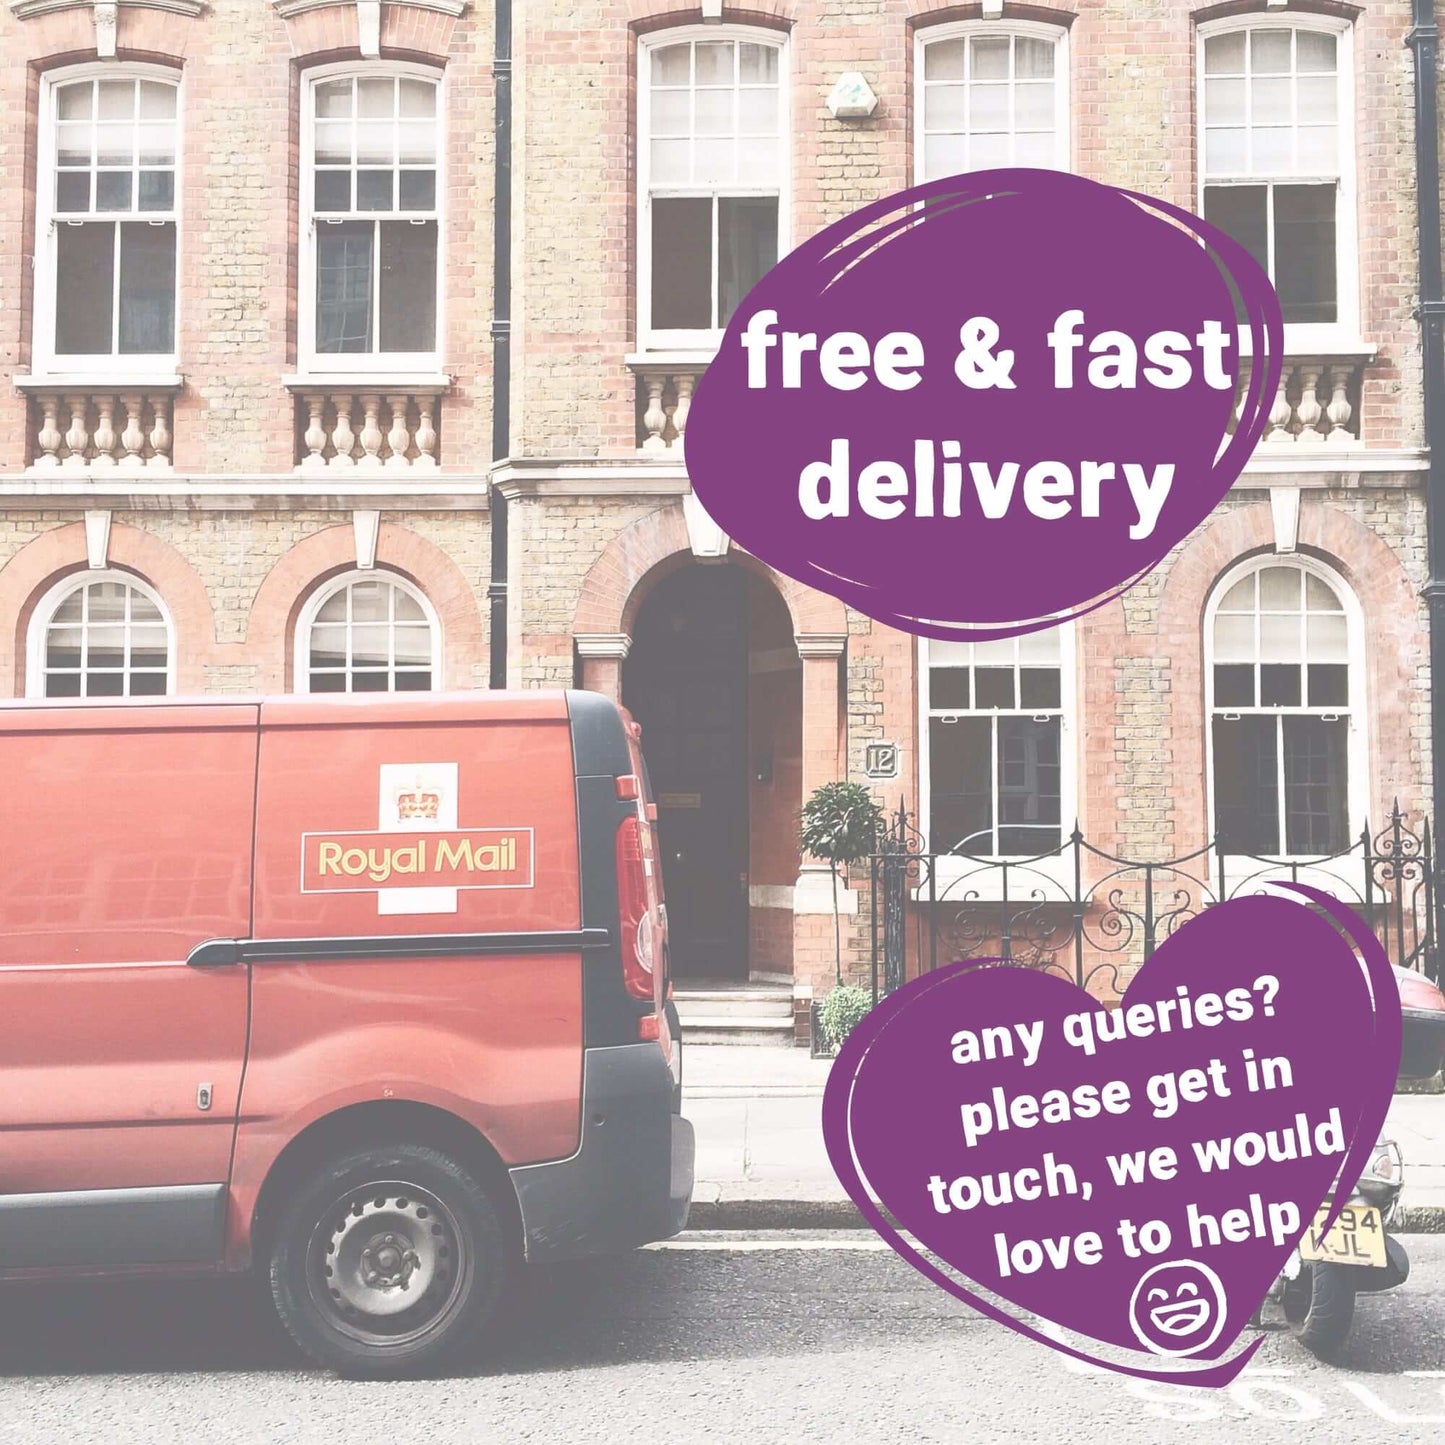 free and next day delivery available for sending a hug gift